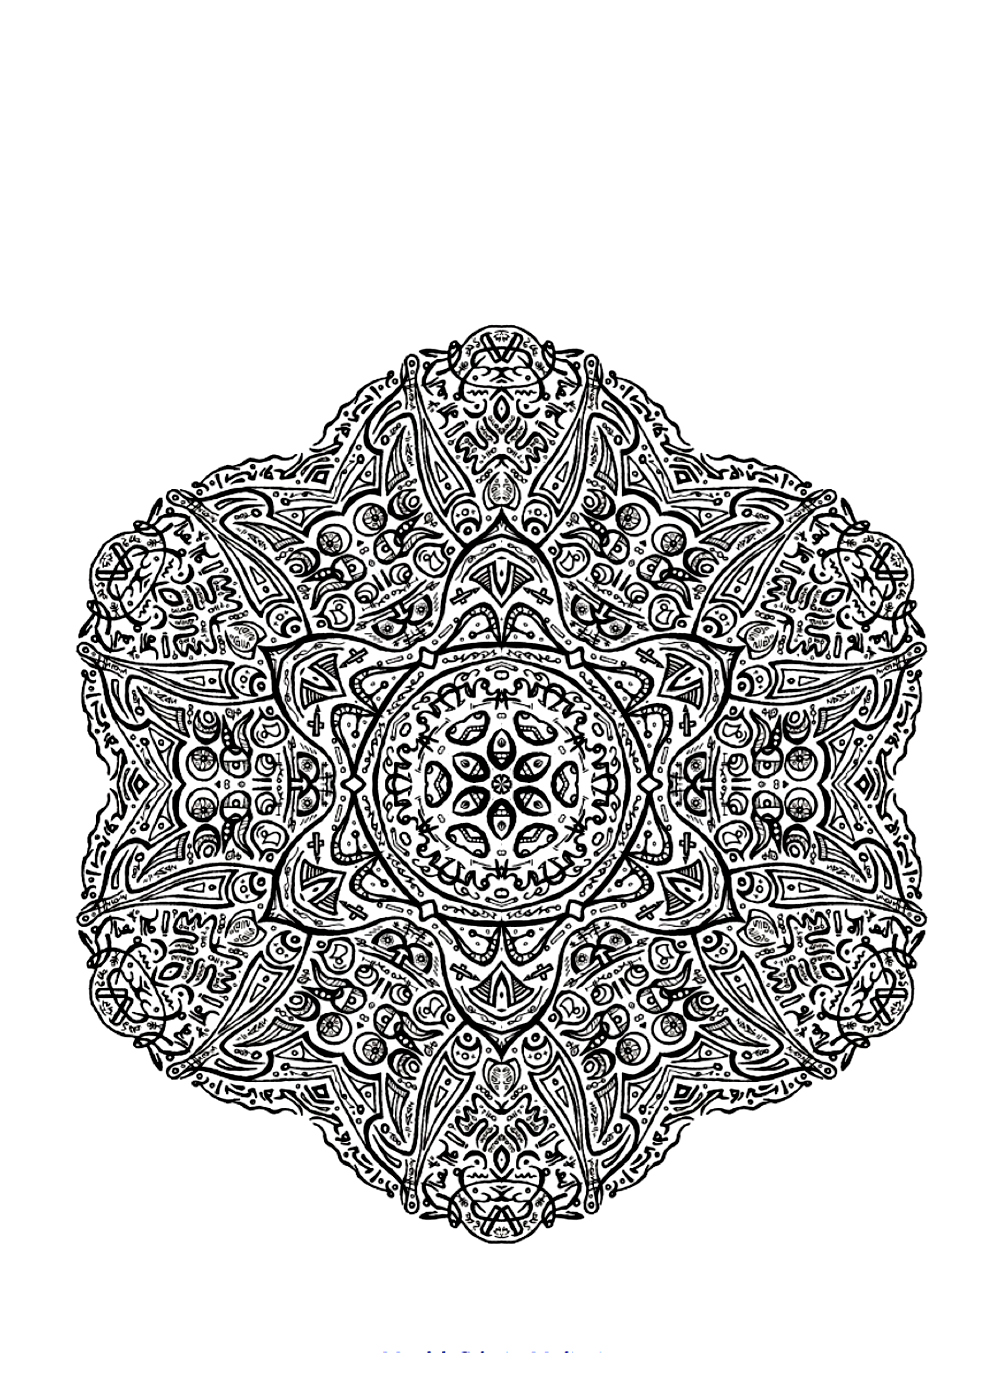 Lot of details insite this Mandala drawing forming a sort of flower